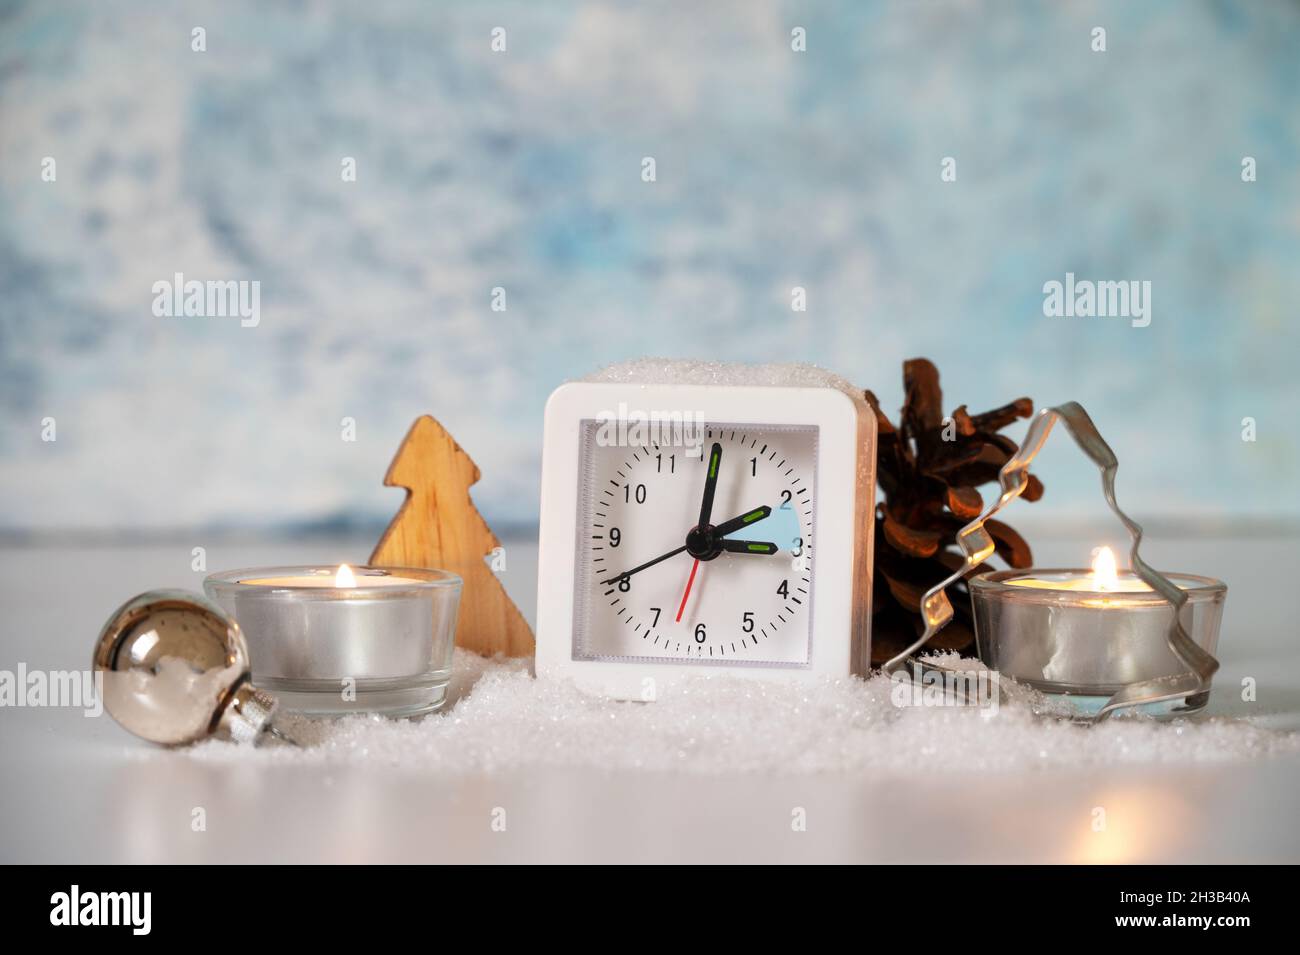 Changing to winter time, modern alarm clock showing the hour switch, artificial snow, candles an Christmas decoration against a light blue background, Stock Photo